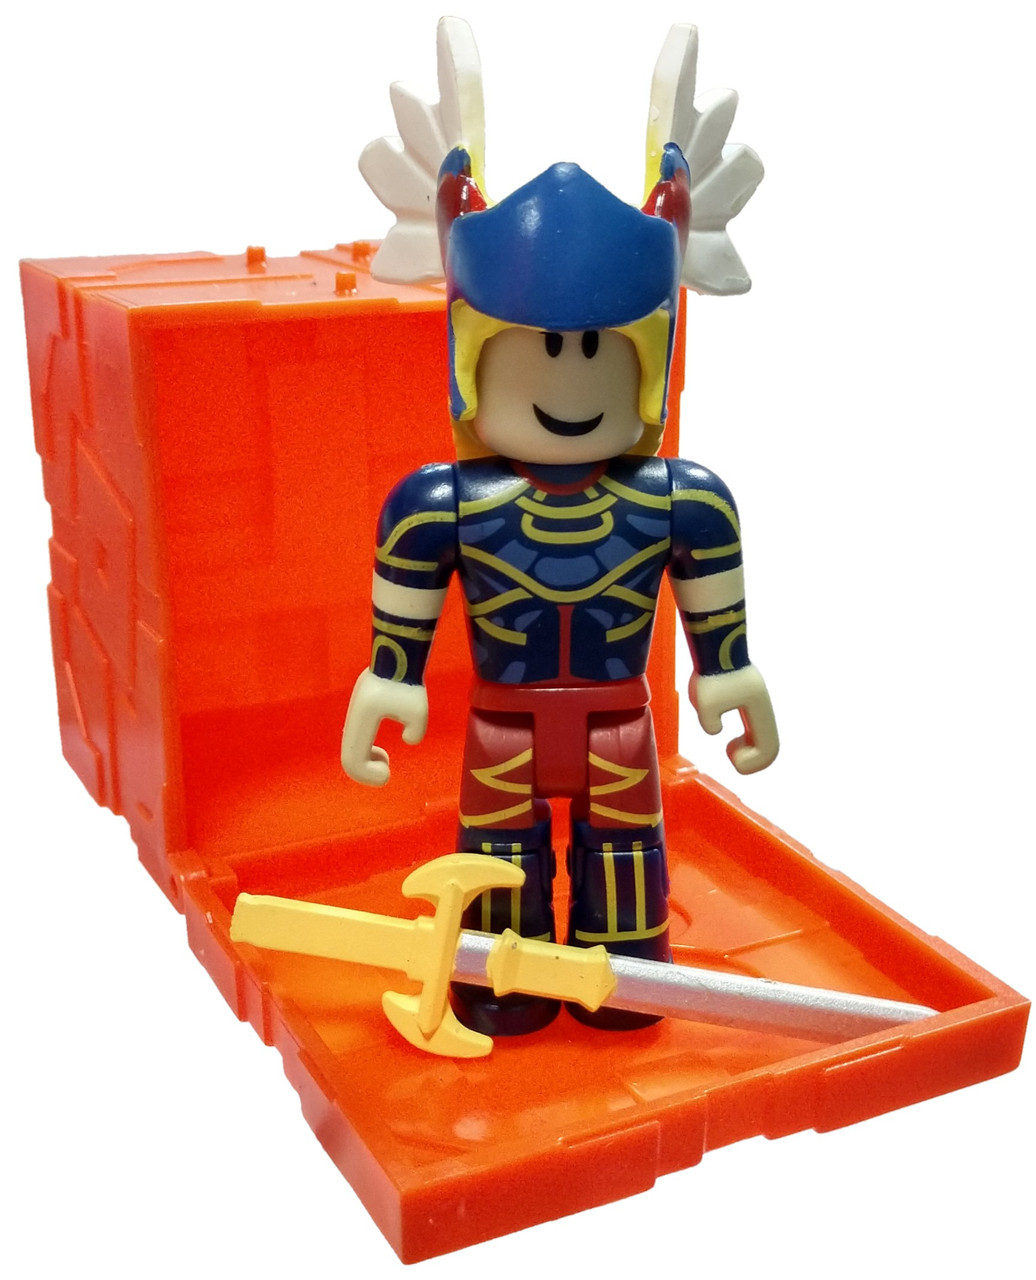 Roblox Series 6 Summoner Tycoon Valkyrie 3 Mini Figure With Orange Cube And Online Code Loose Jazwares Toywiz - black valkyrie roblox